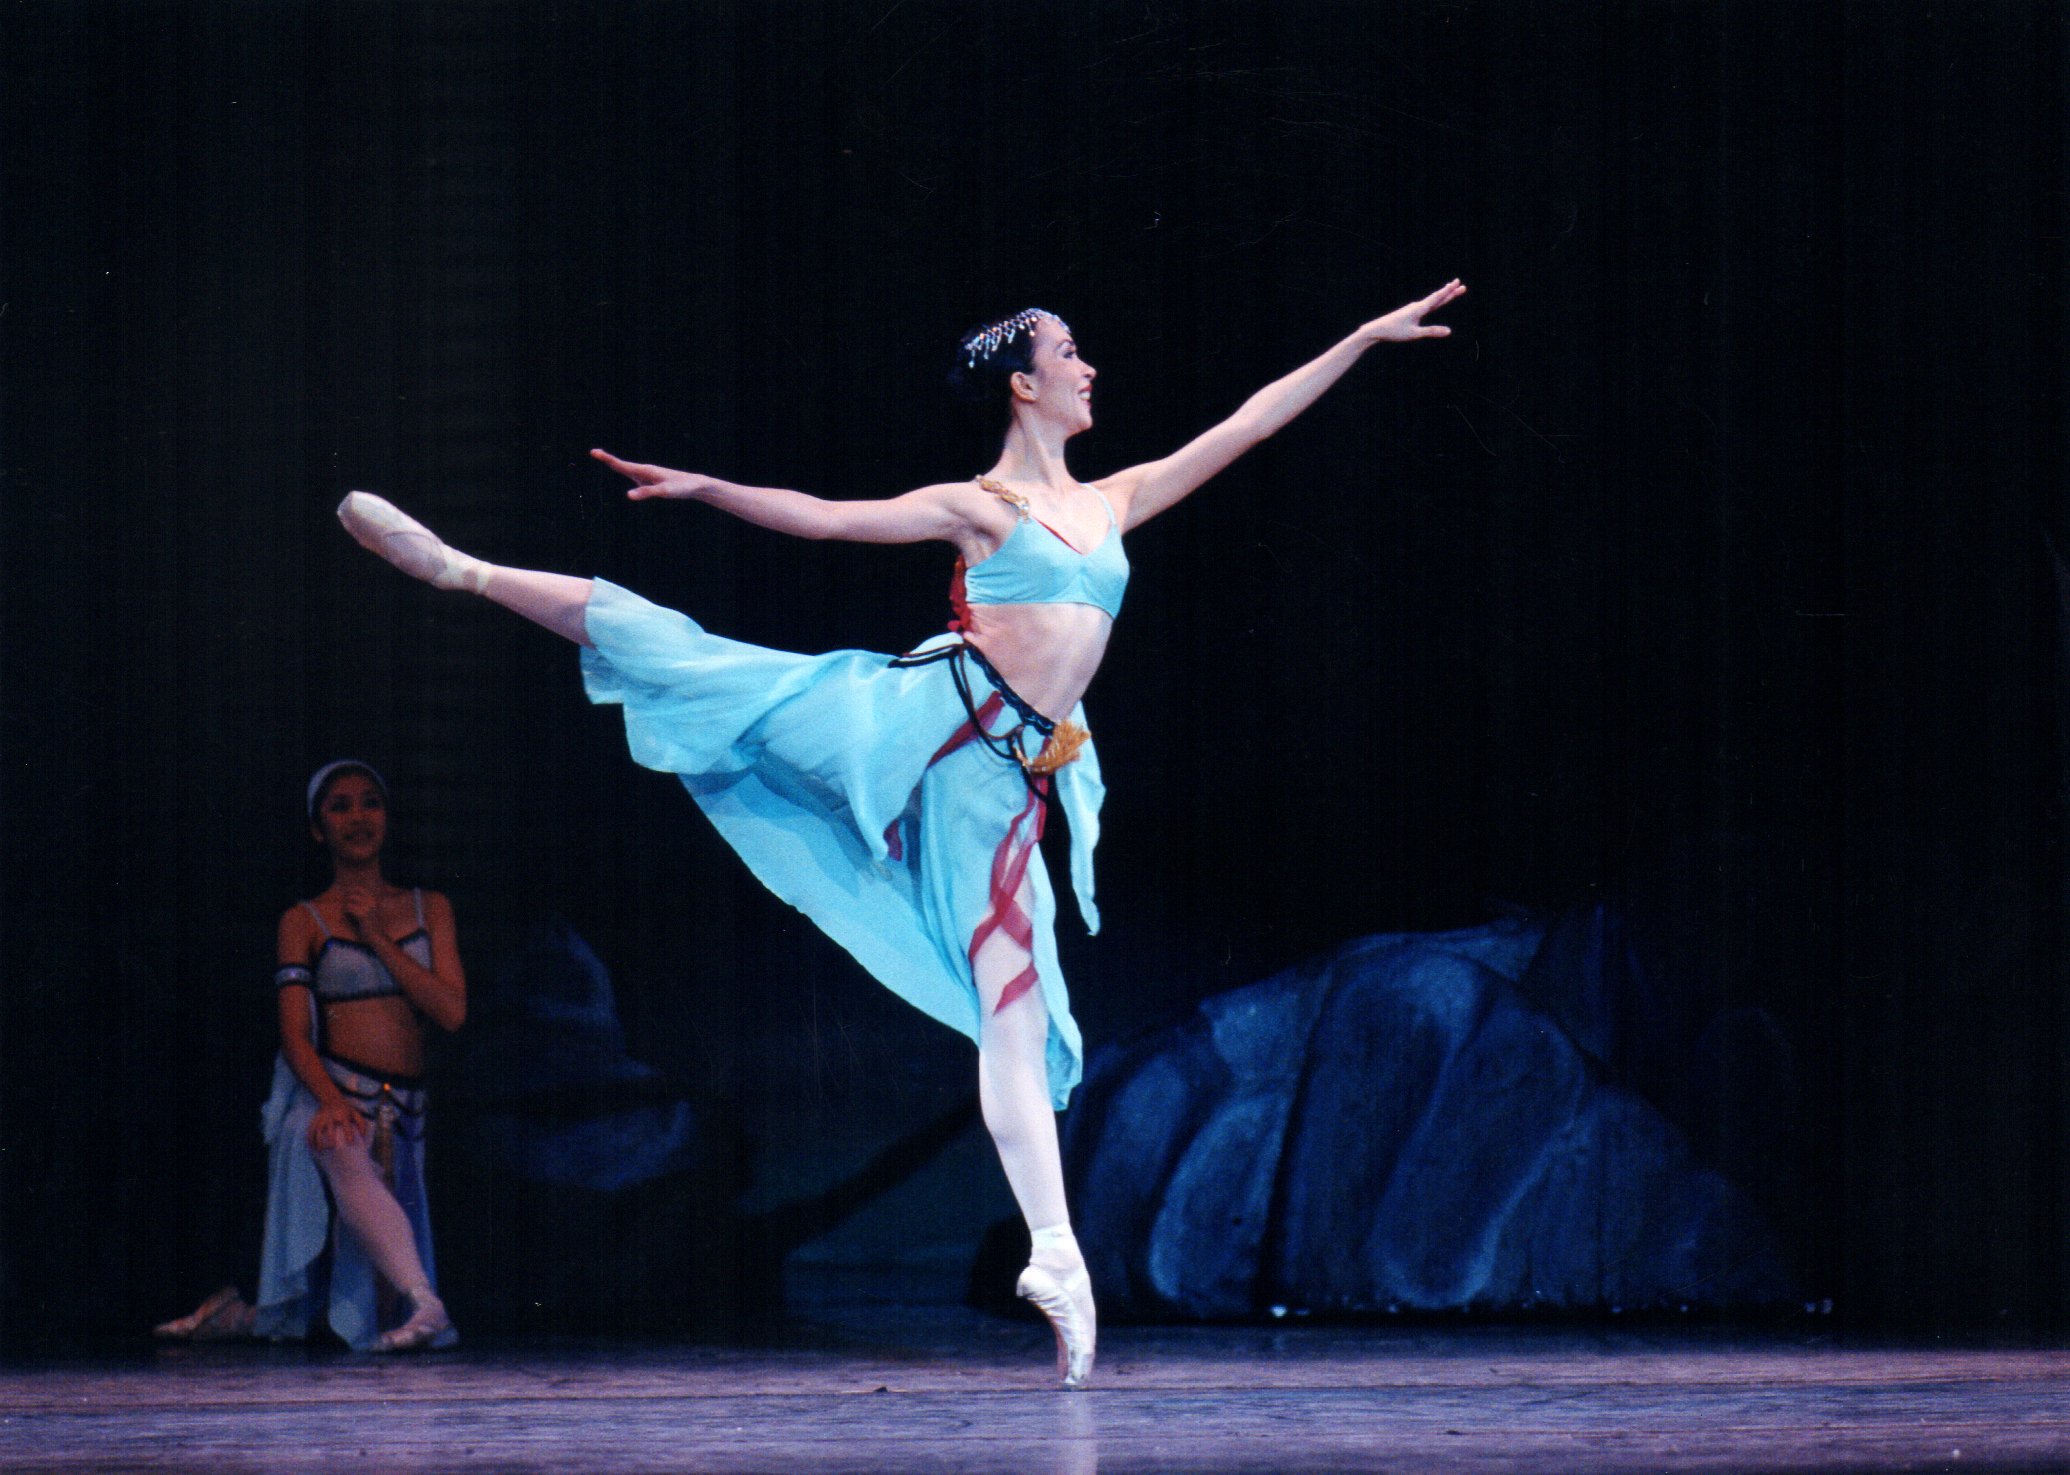    As Medora, Aileen Galinera channels the color of the ocean in her aquamarine wear in this scene from  Le Corsaire  (2002). Nimble on her feet, Medora is in a cheerful mood, unaware that danger lurks as a slave trader is about to abduct her and her